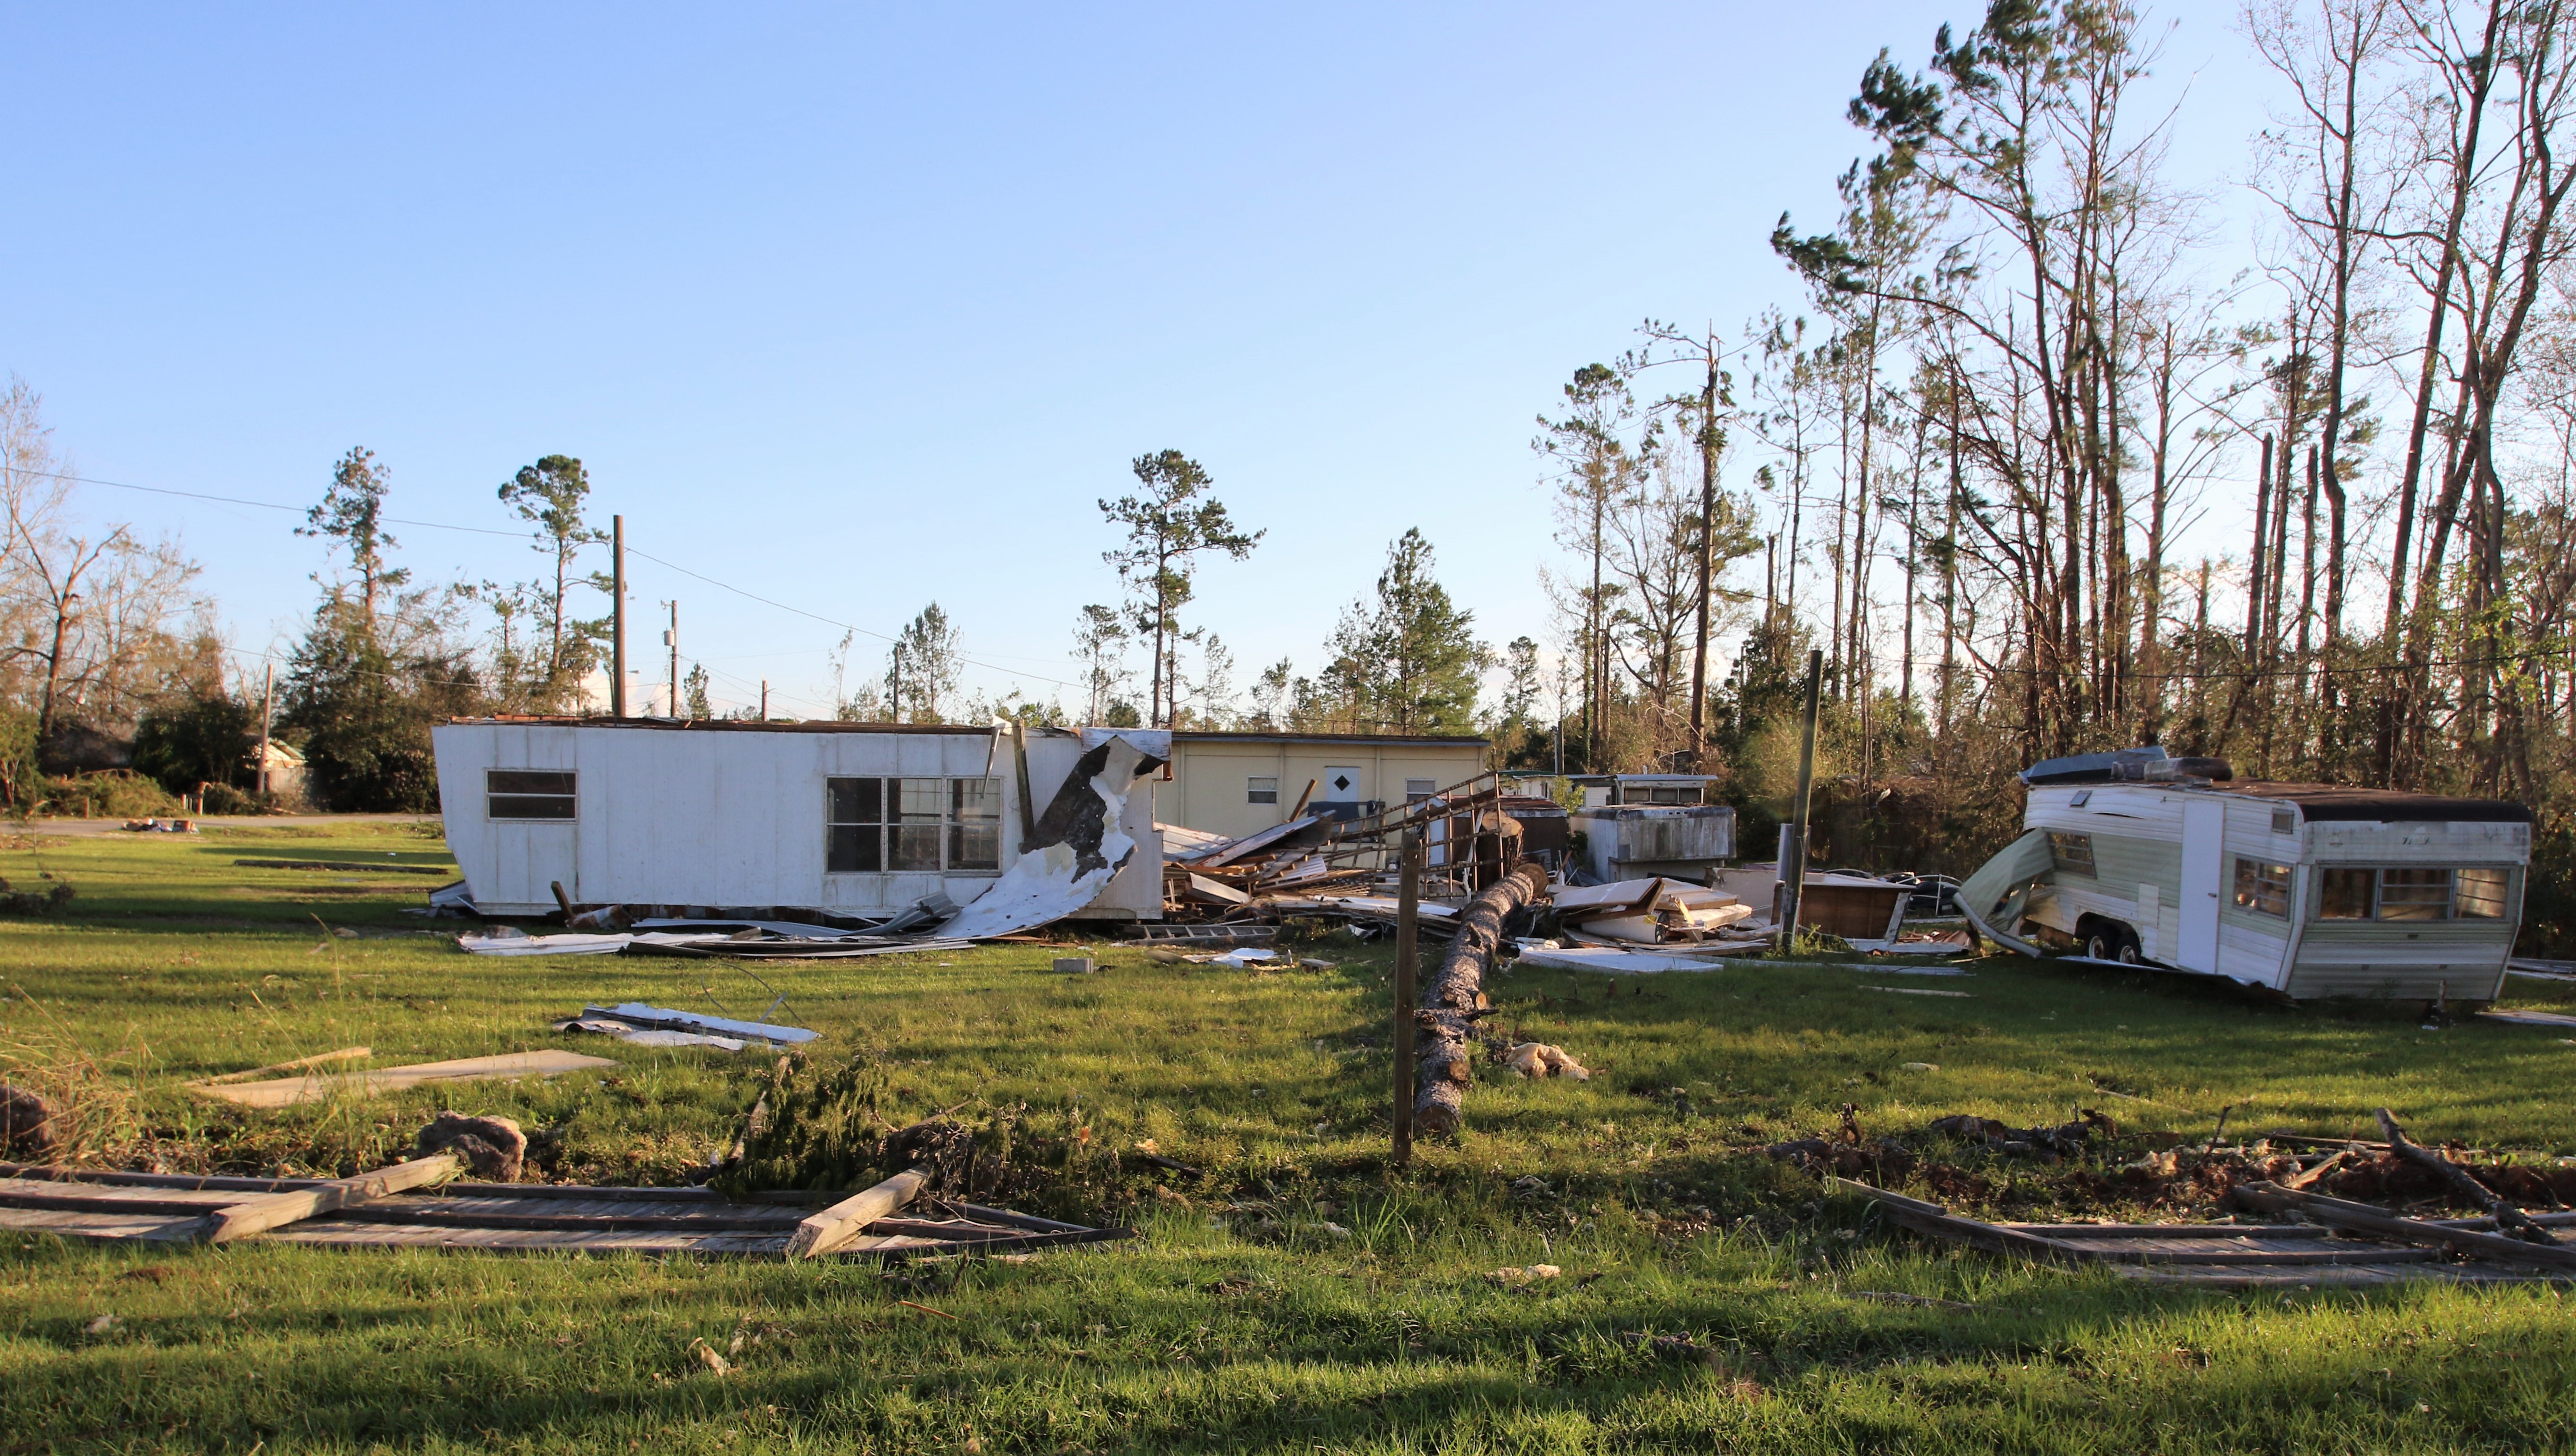 Down tress and damaged homes caused by winds from Hurricane Michael.